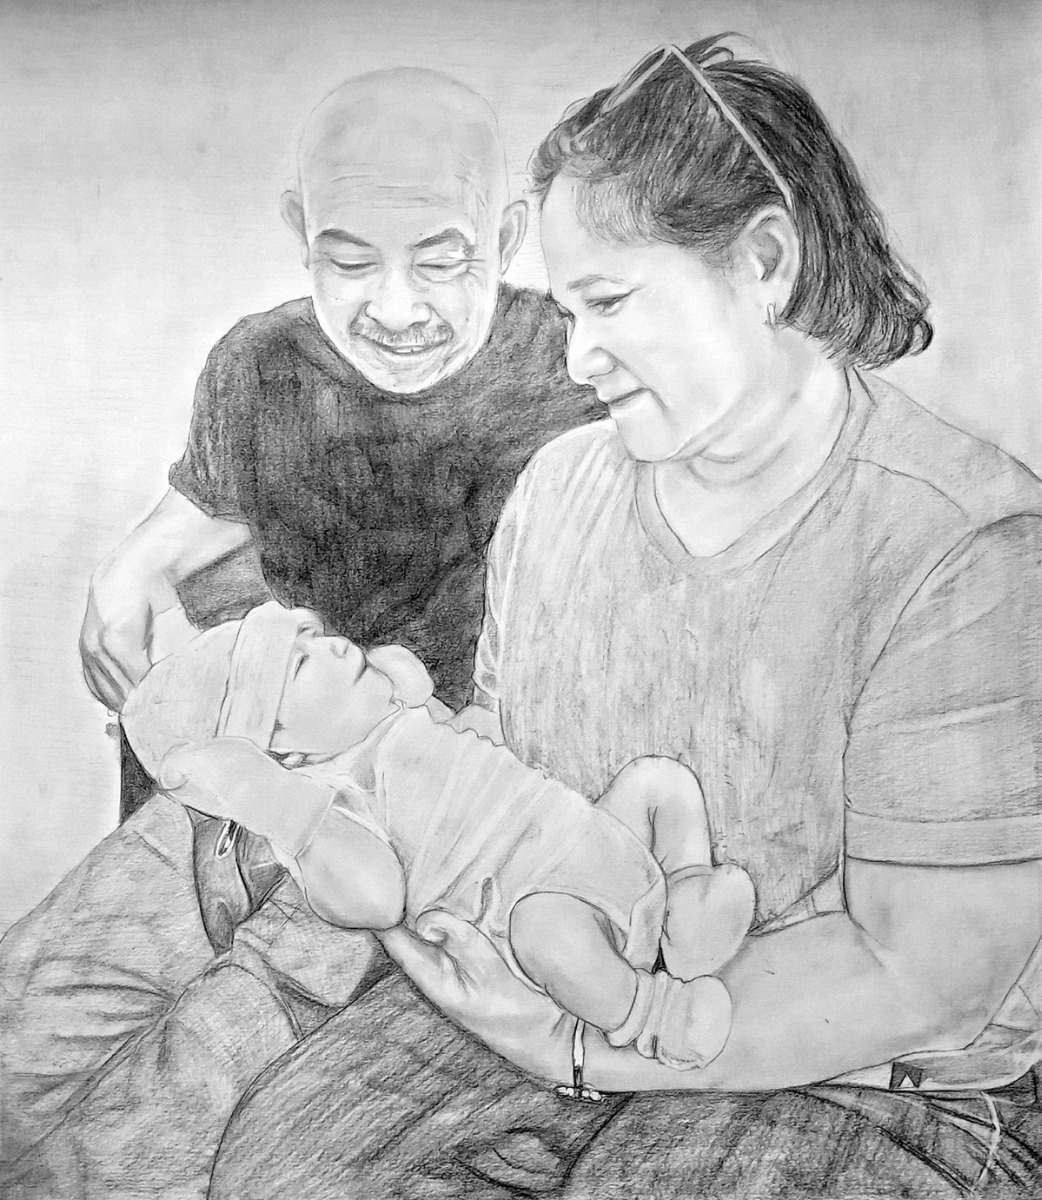 A pencil drawing of an older couple holding a baby.